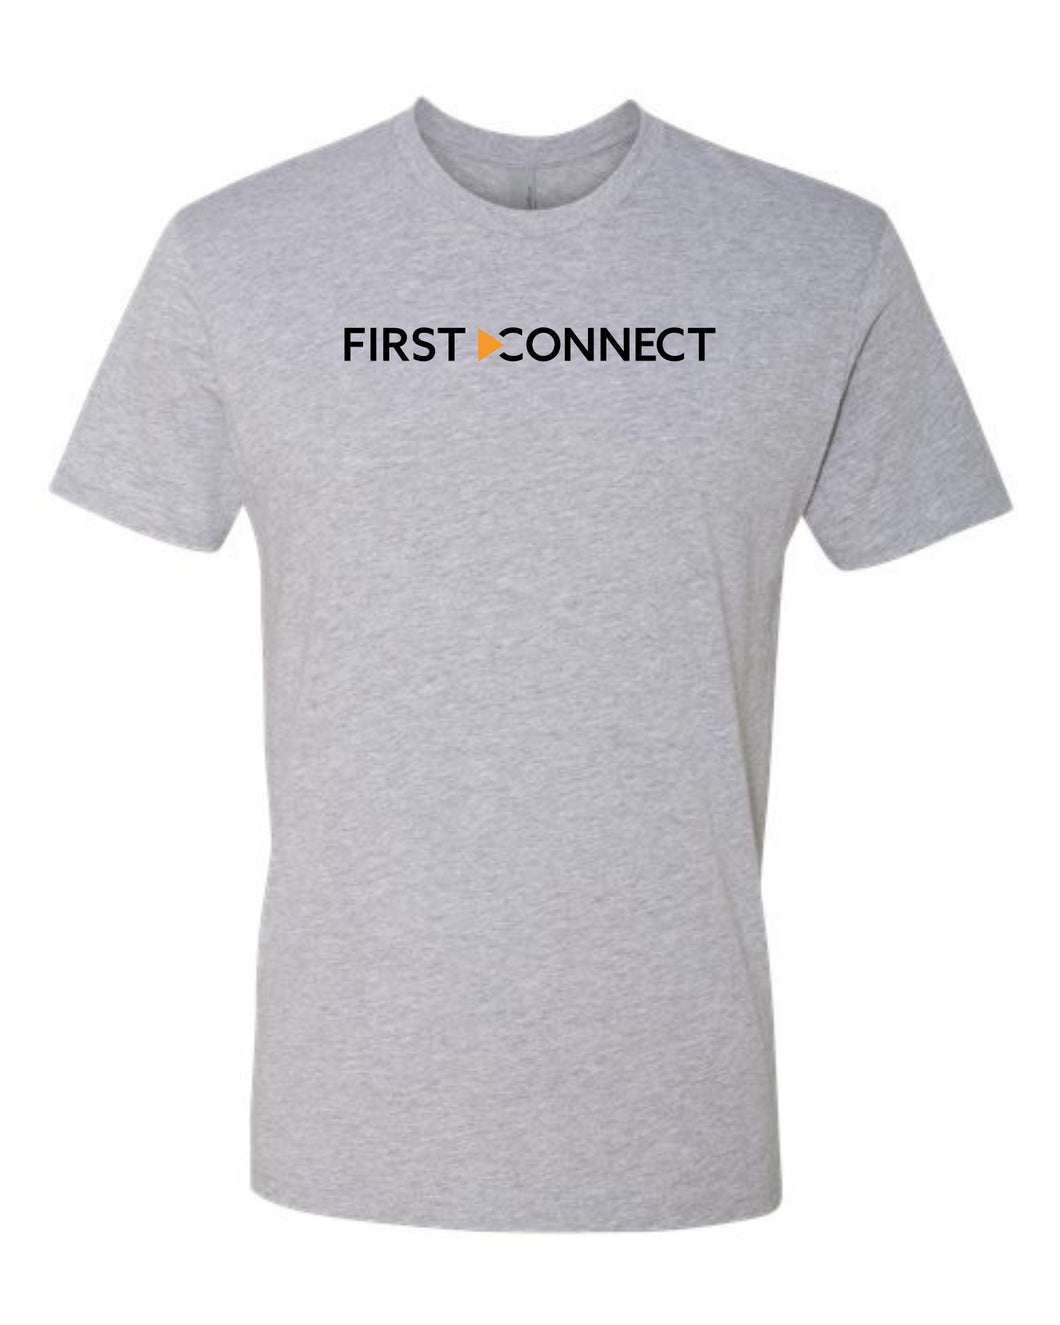 First Connect Men's Grey T-Shirt